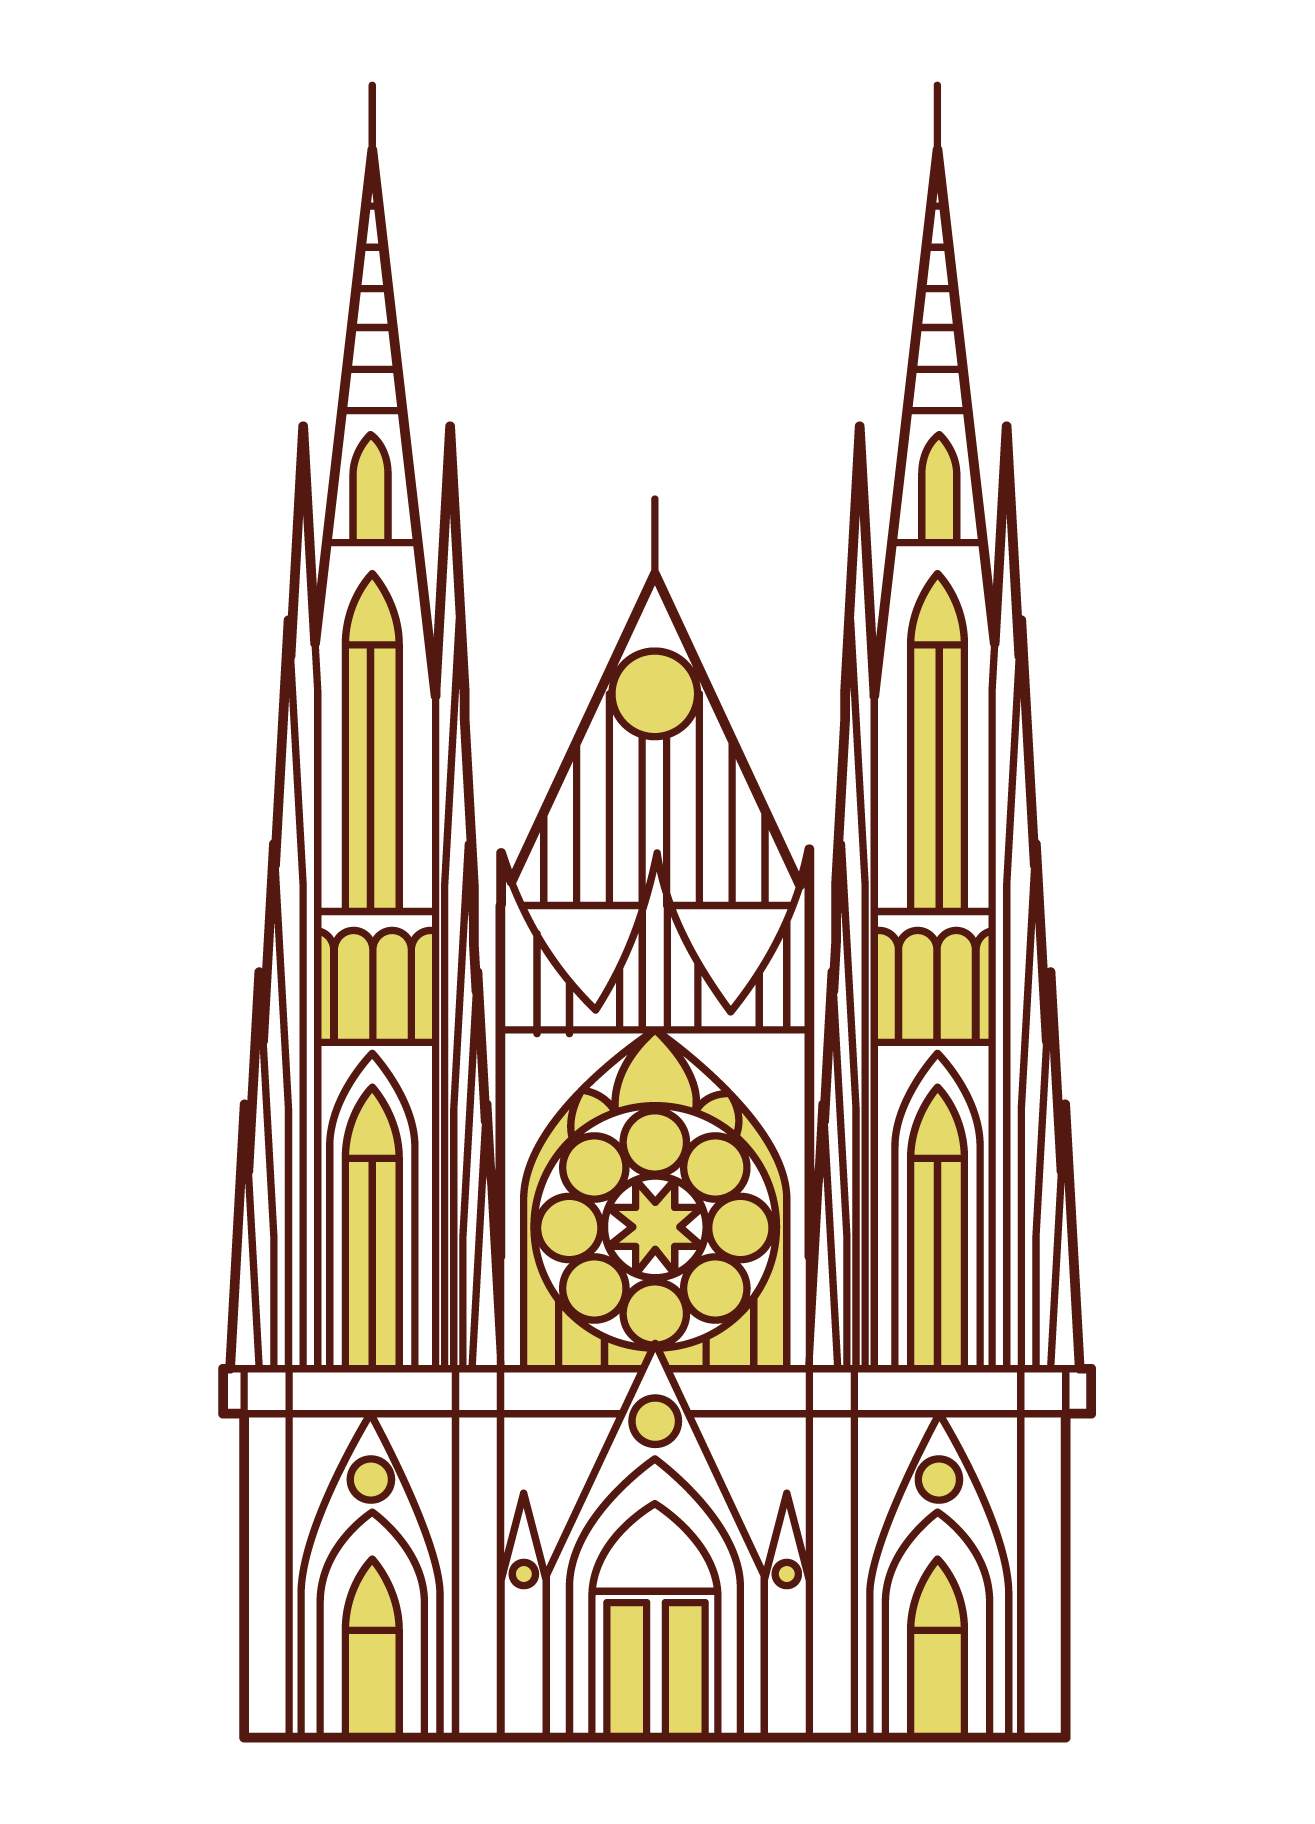 Illustration of St. Vito's Cathedral